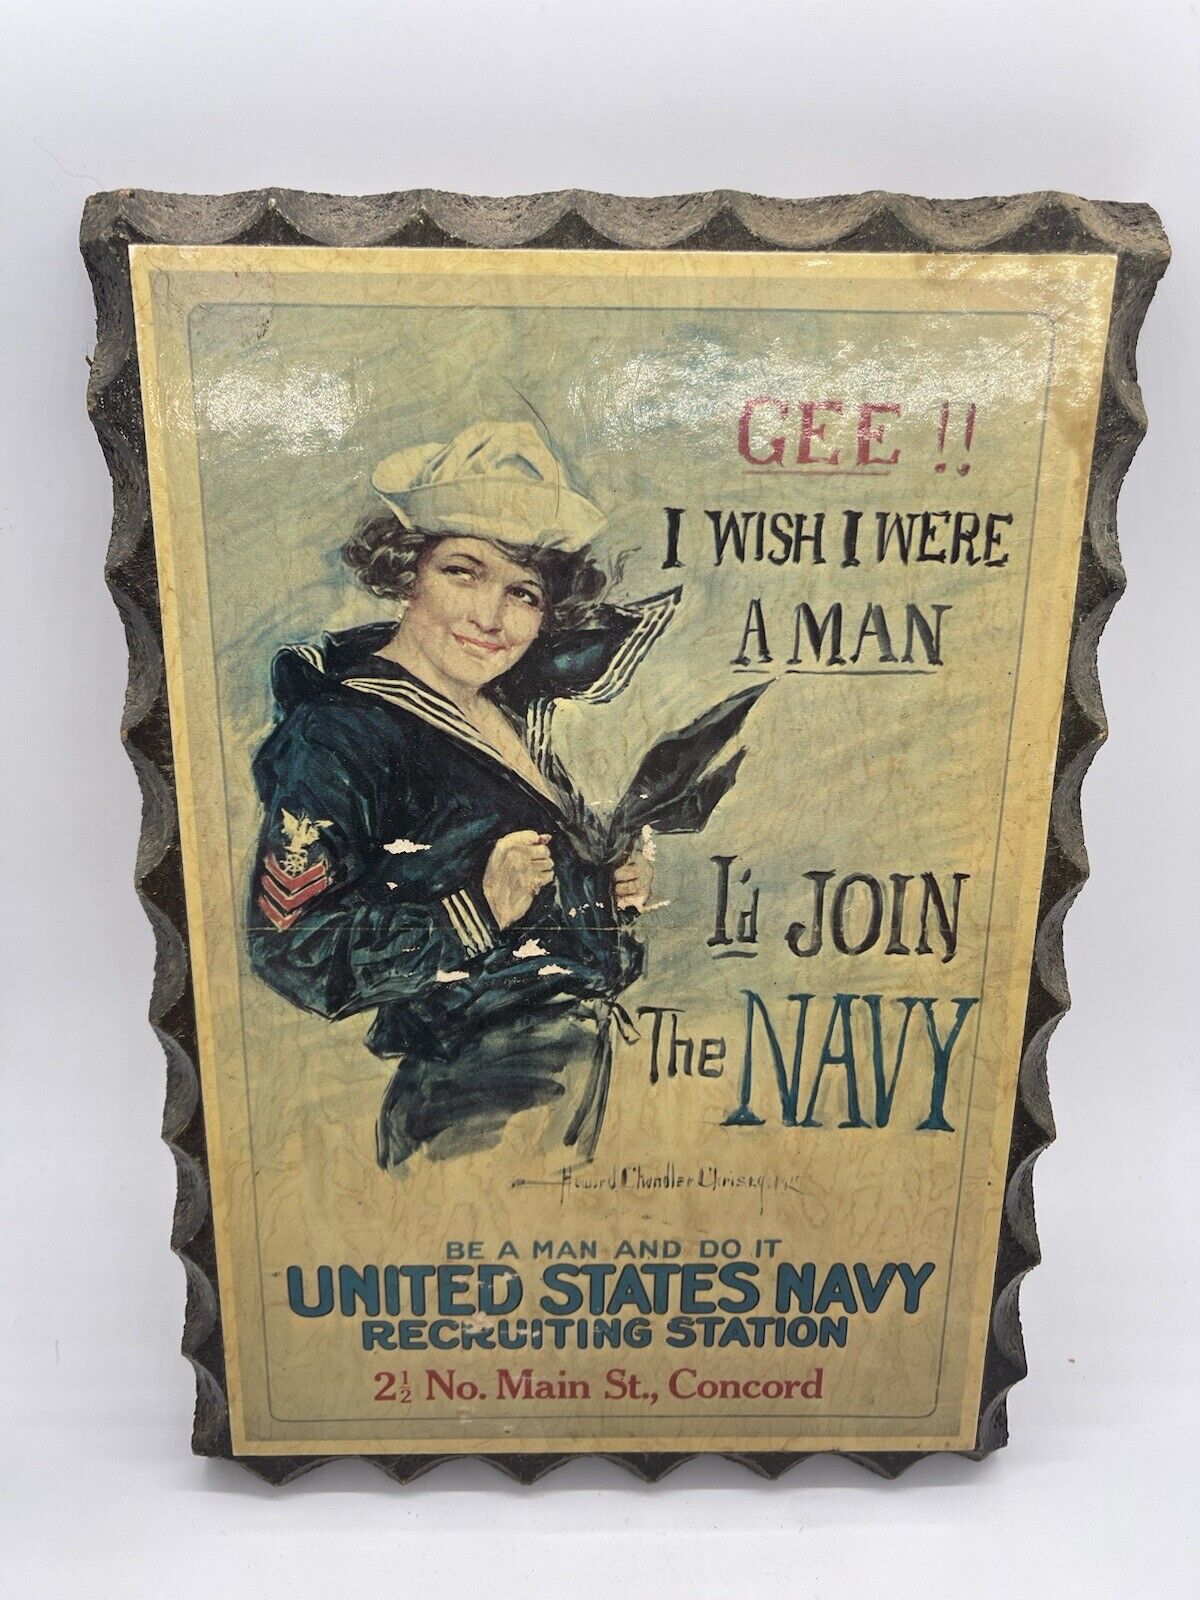 RARE Navy Recruiting “GEE I Wish.” Vintage Wooden Plaque Jay Art 1972 Used